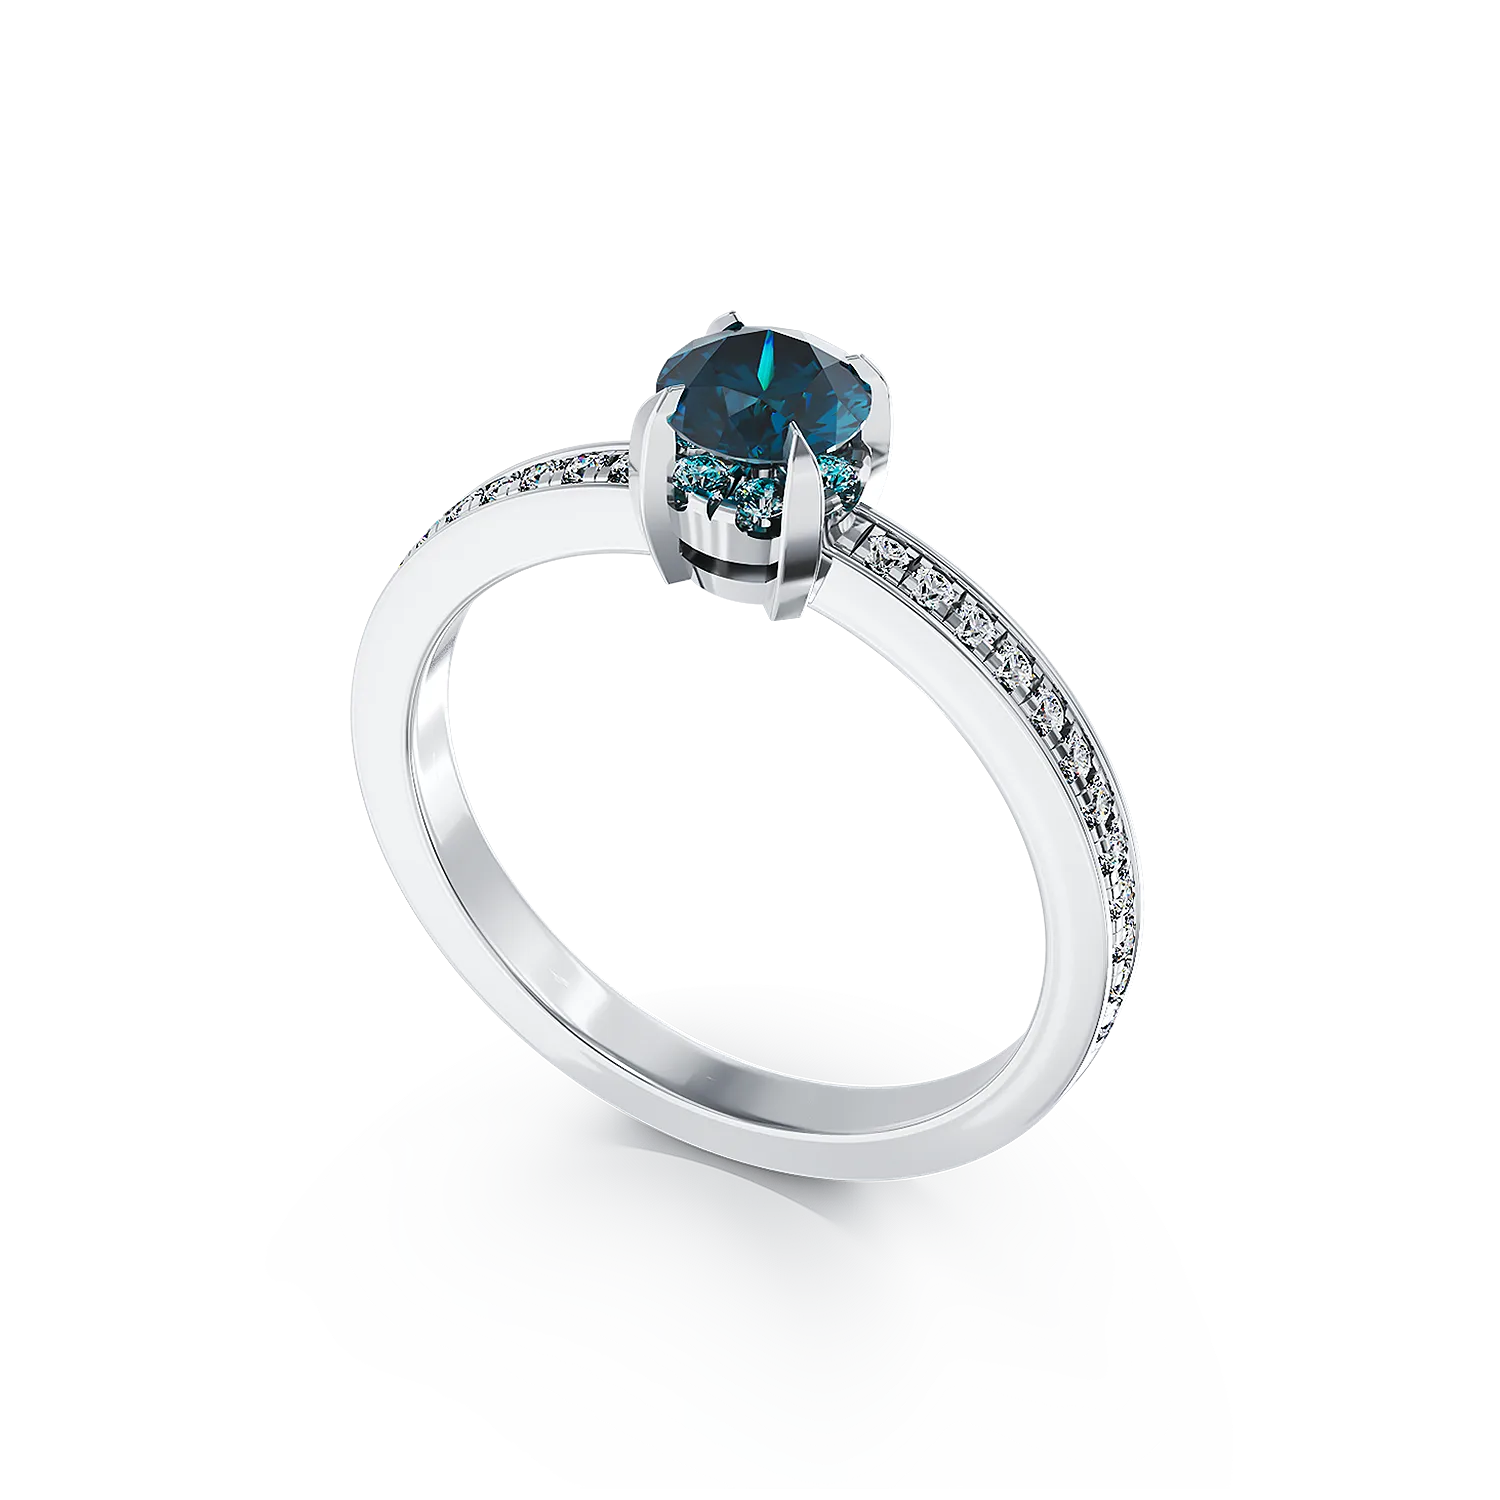 18K white gold engagement ring with 0.41ct blue diamond and 0.2ct Clear diamonds